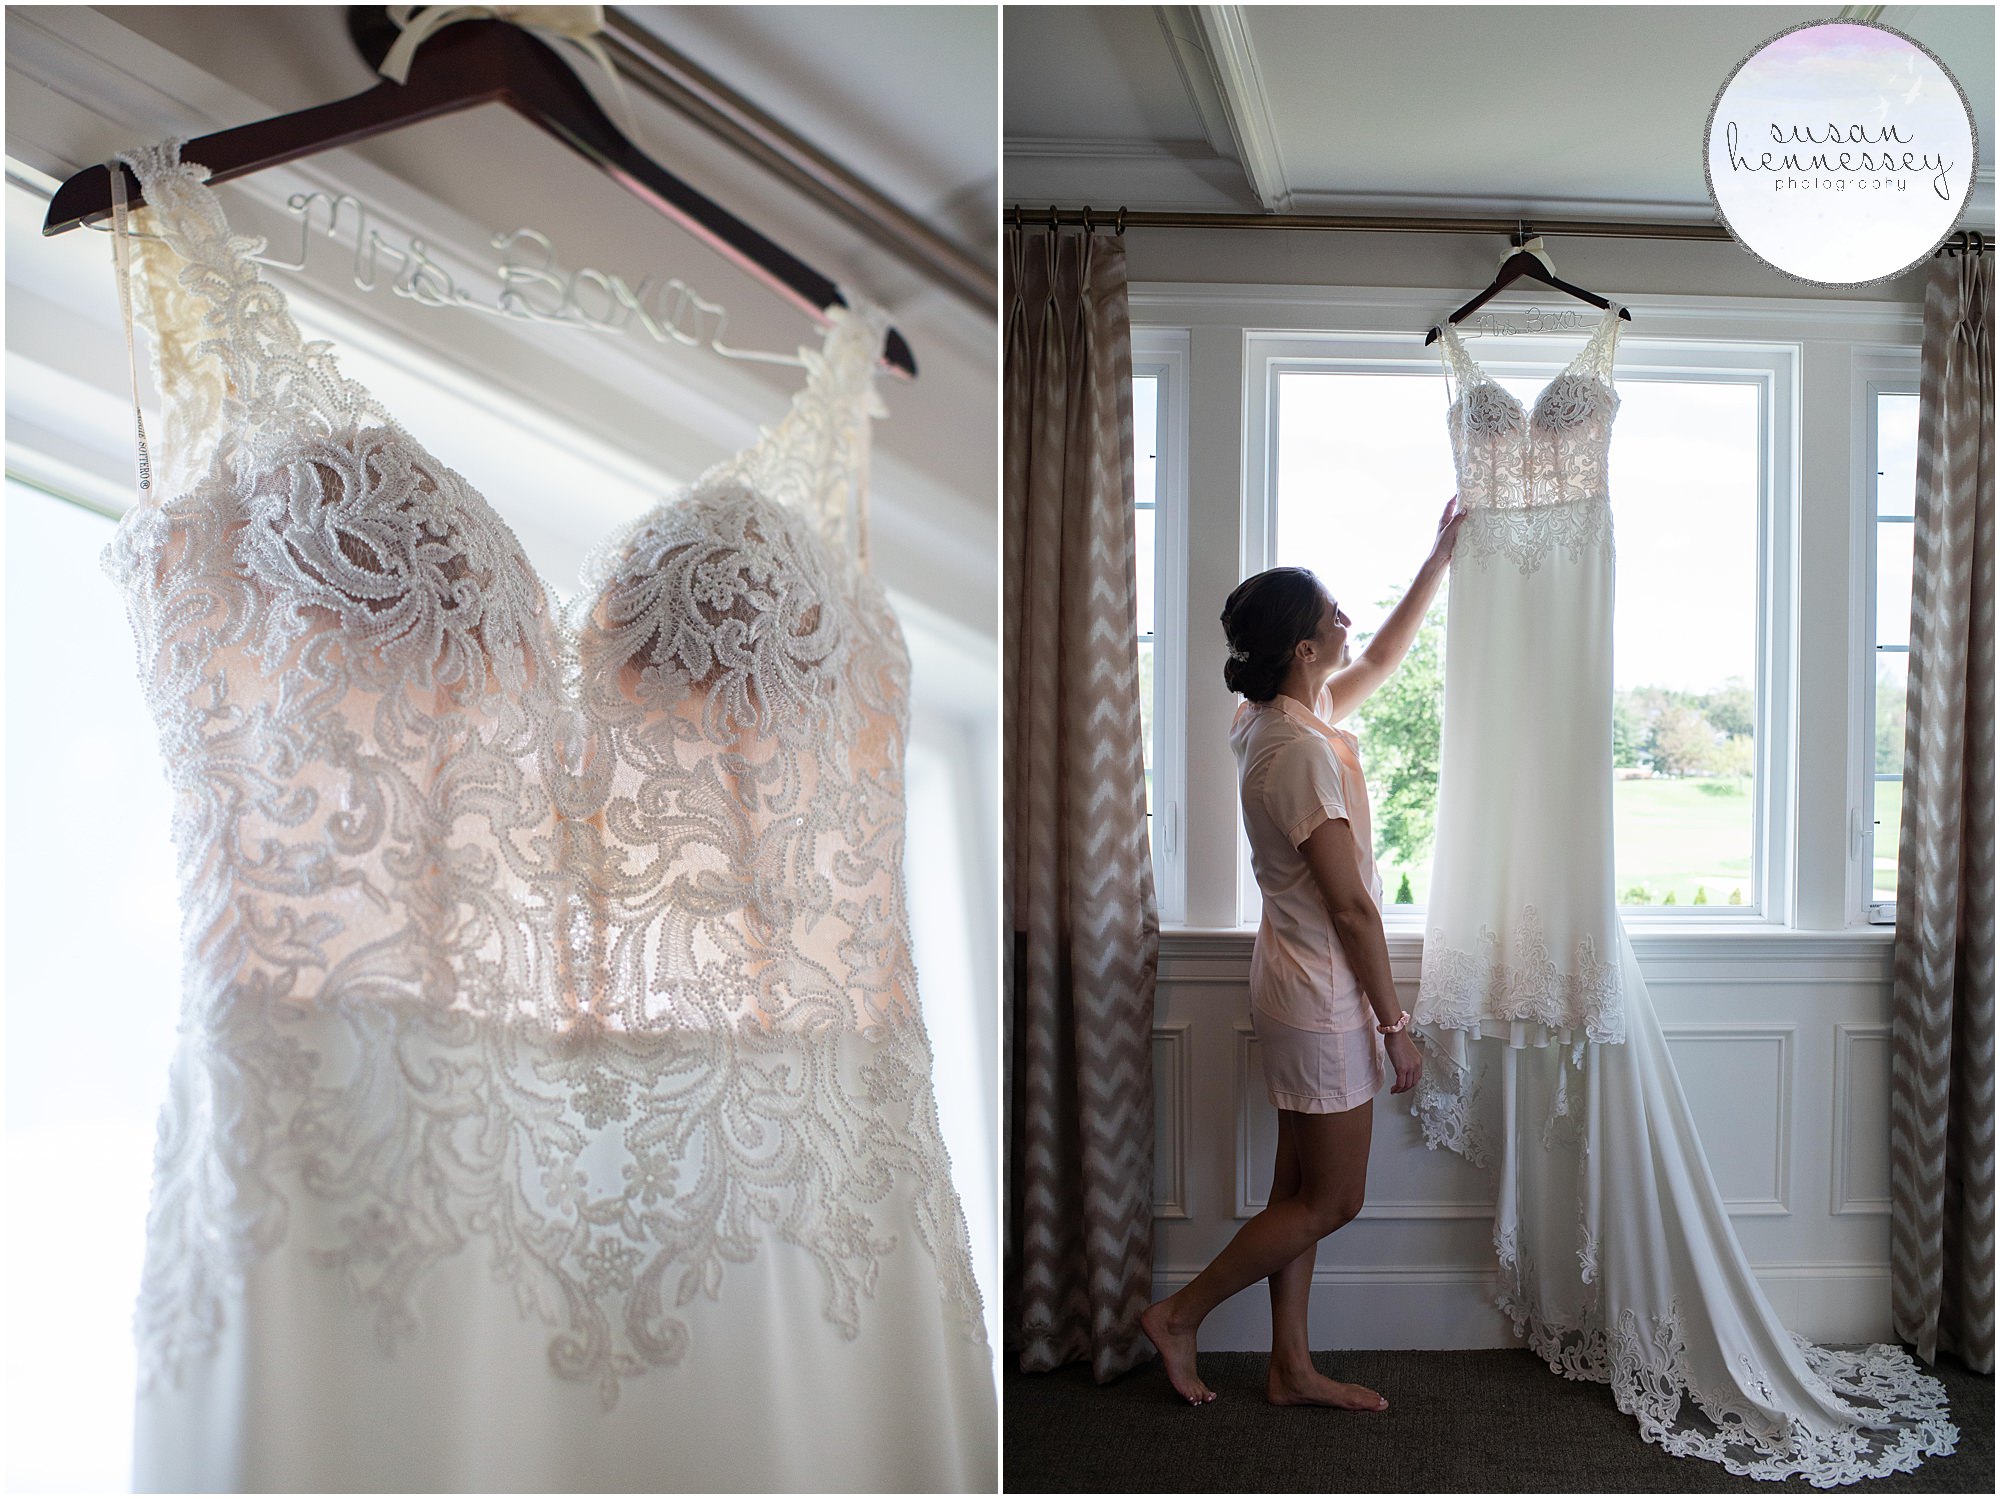 A bride and her wedding gown in the Atlantic City Country Club bridal suite